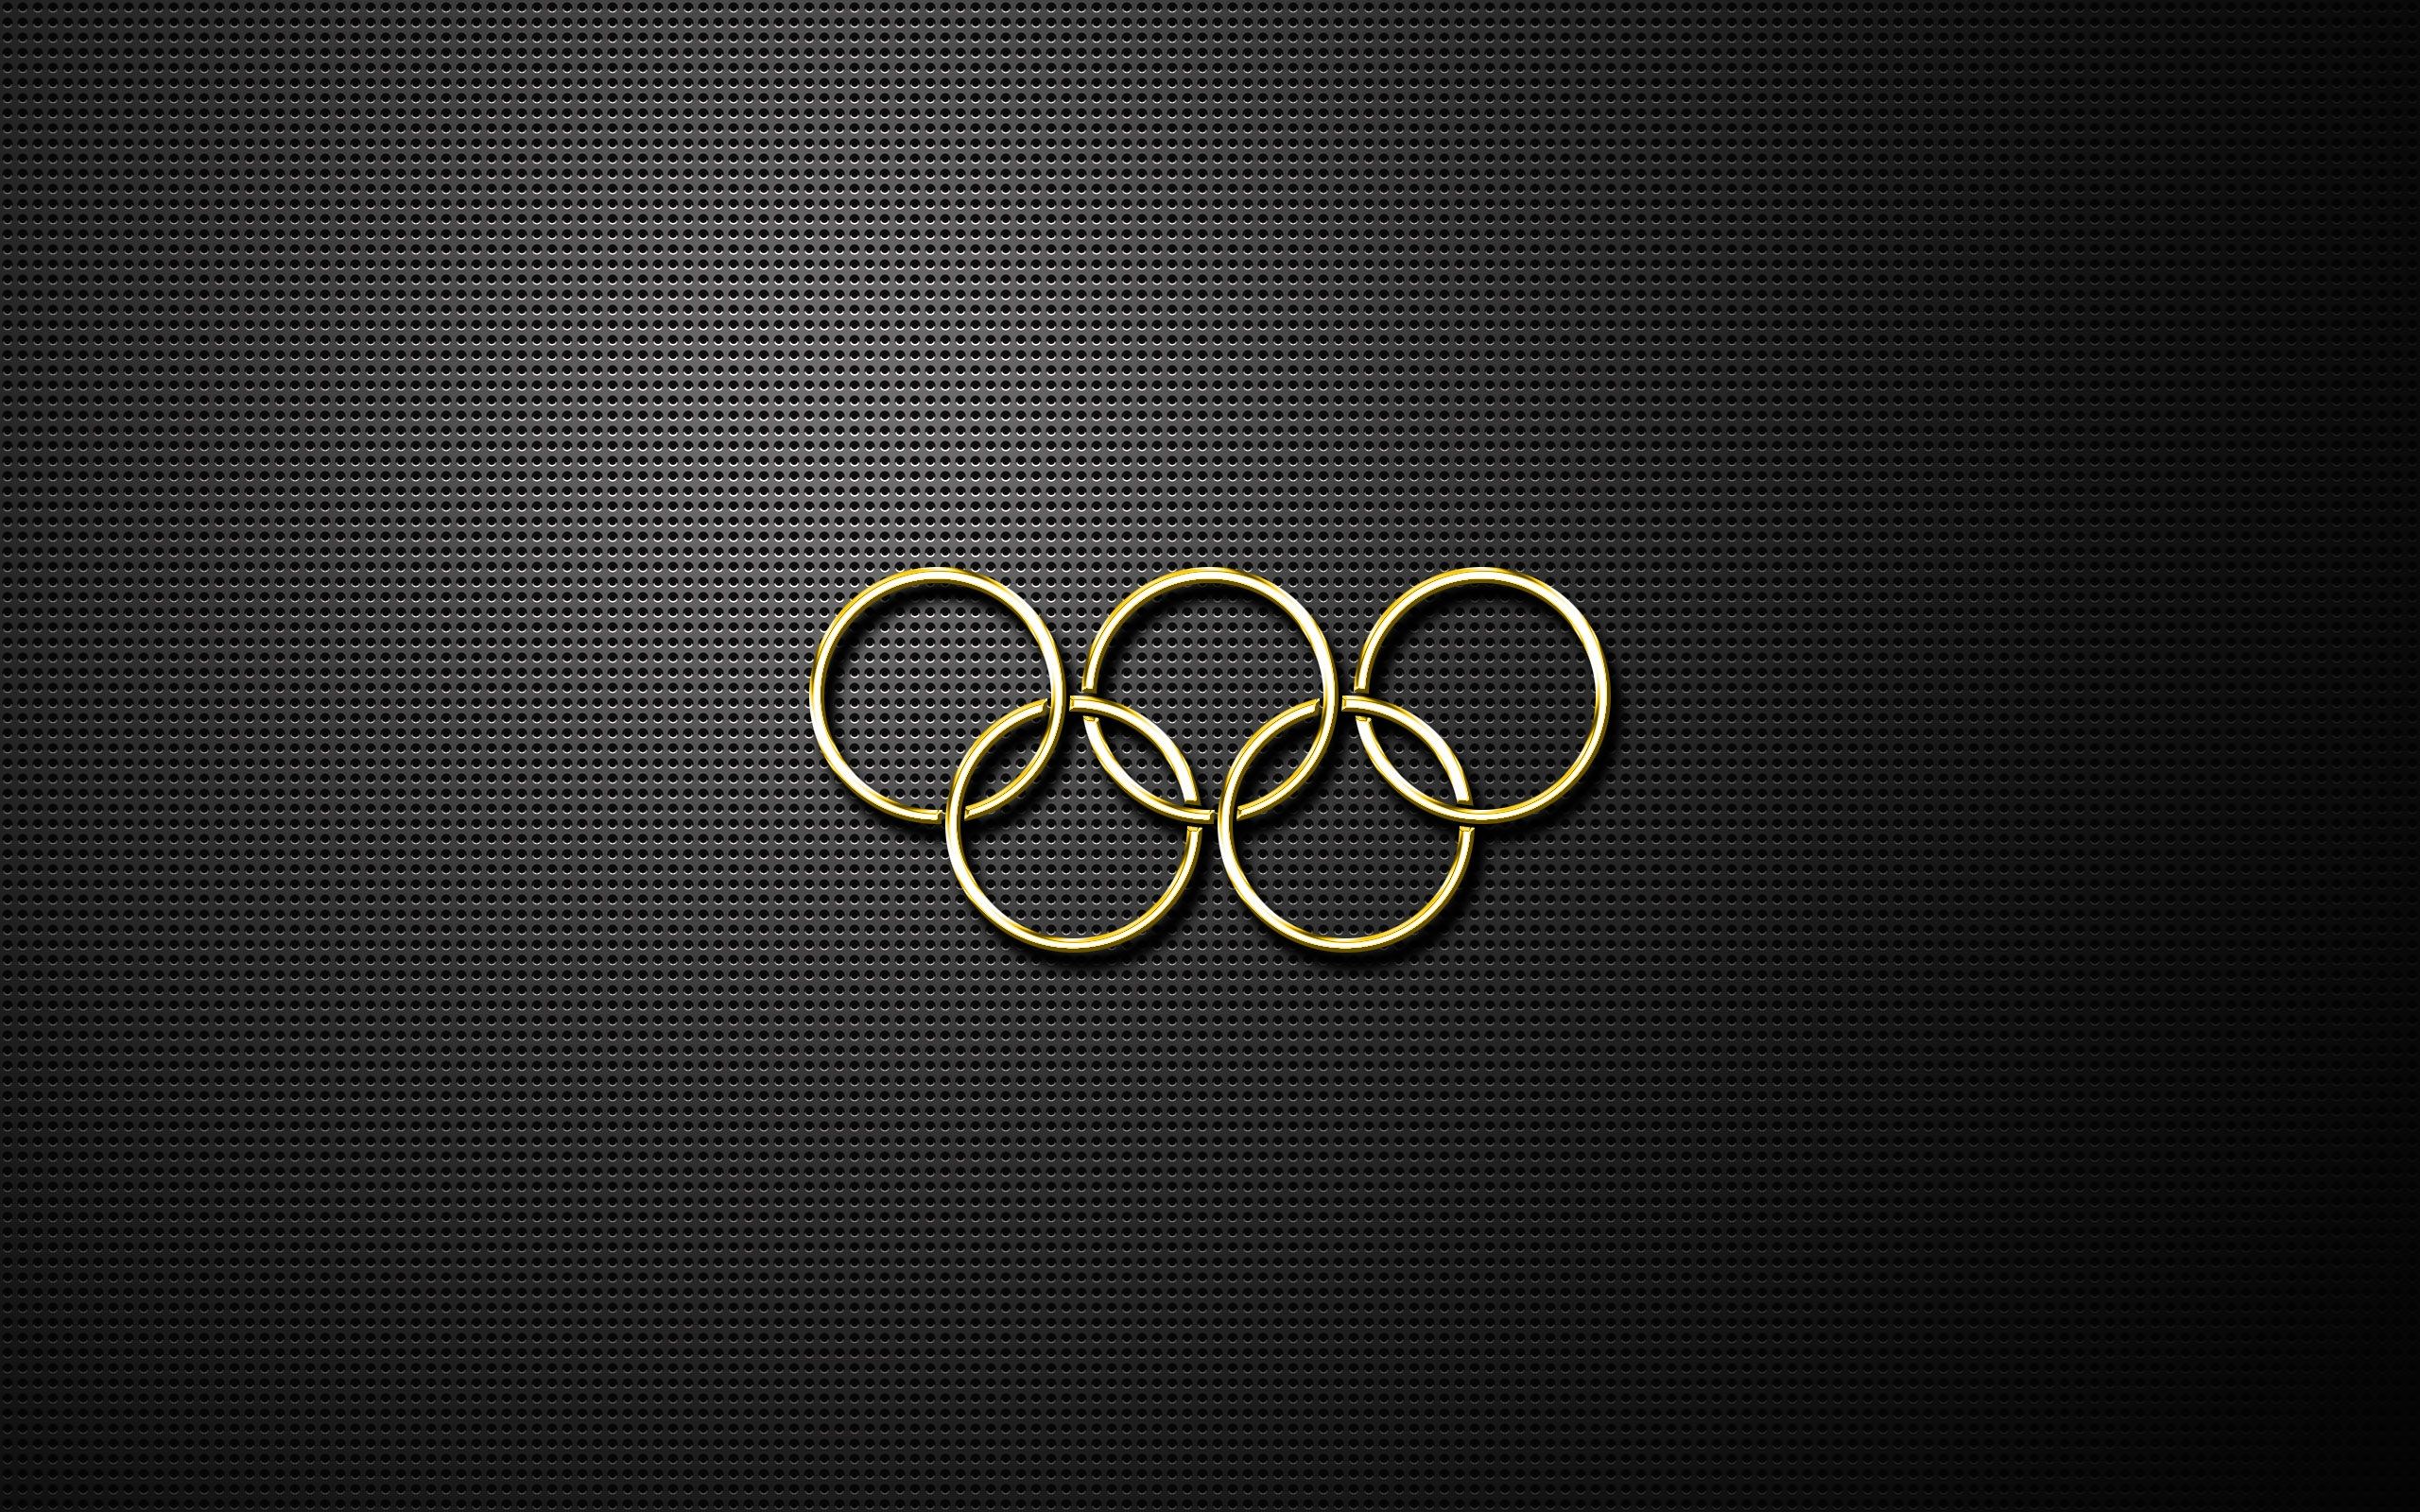 Free download Olympics Wallpapers 4K 1024x723 px WallpapersExpertcom  1024x723 for your Desktop Mobile  Tablet  Explore 55 Olympics  Wallpaper  Usain Bolt Wallpaper 2015 Olympics Winter Olympics Wallpapers  2020 Summer Olympics Wallpapers